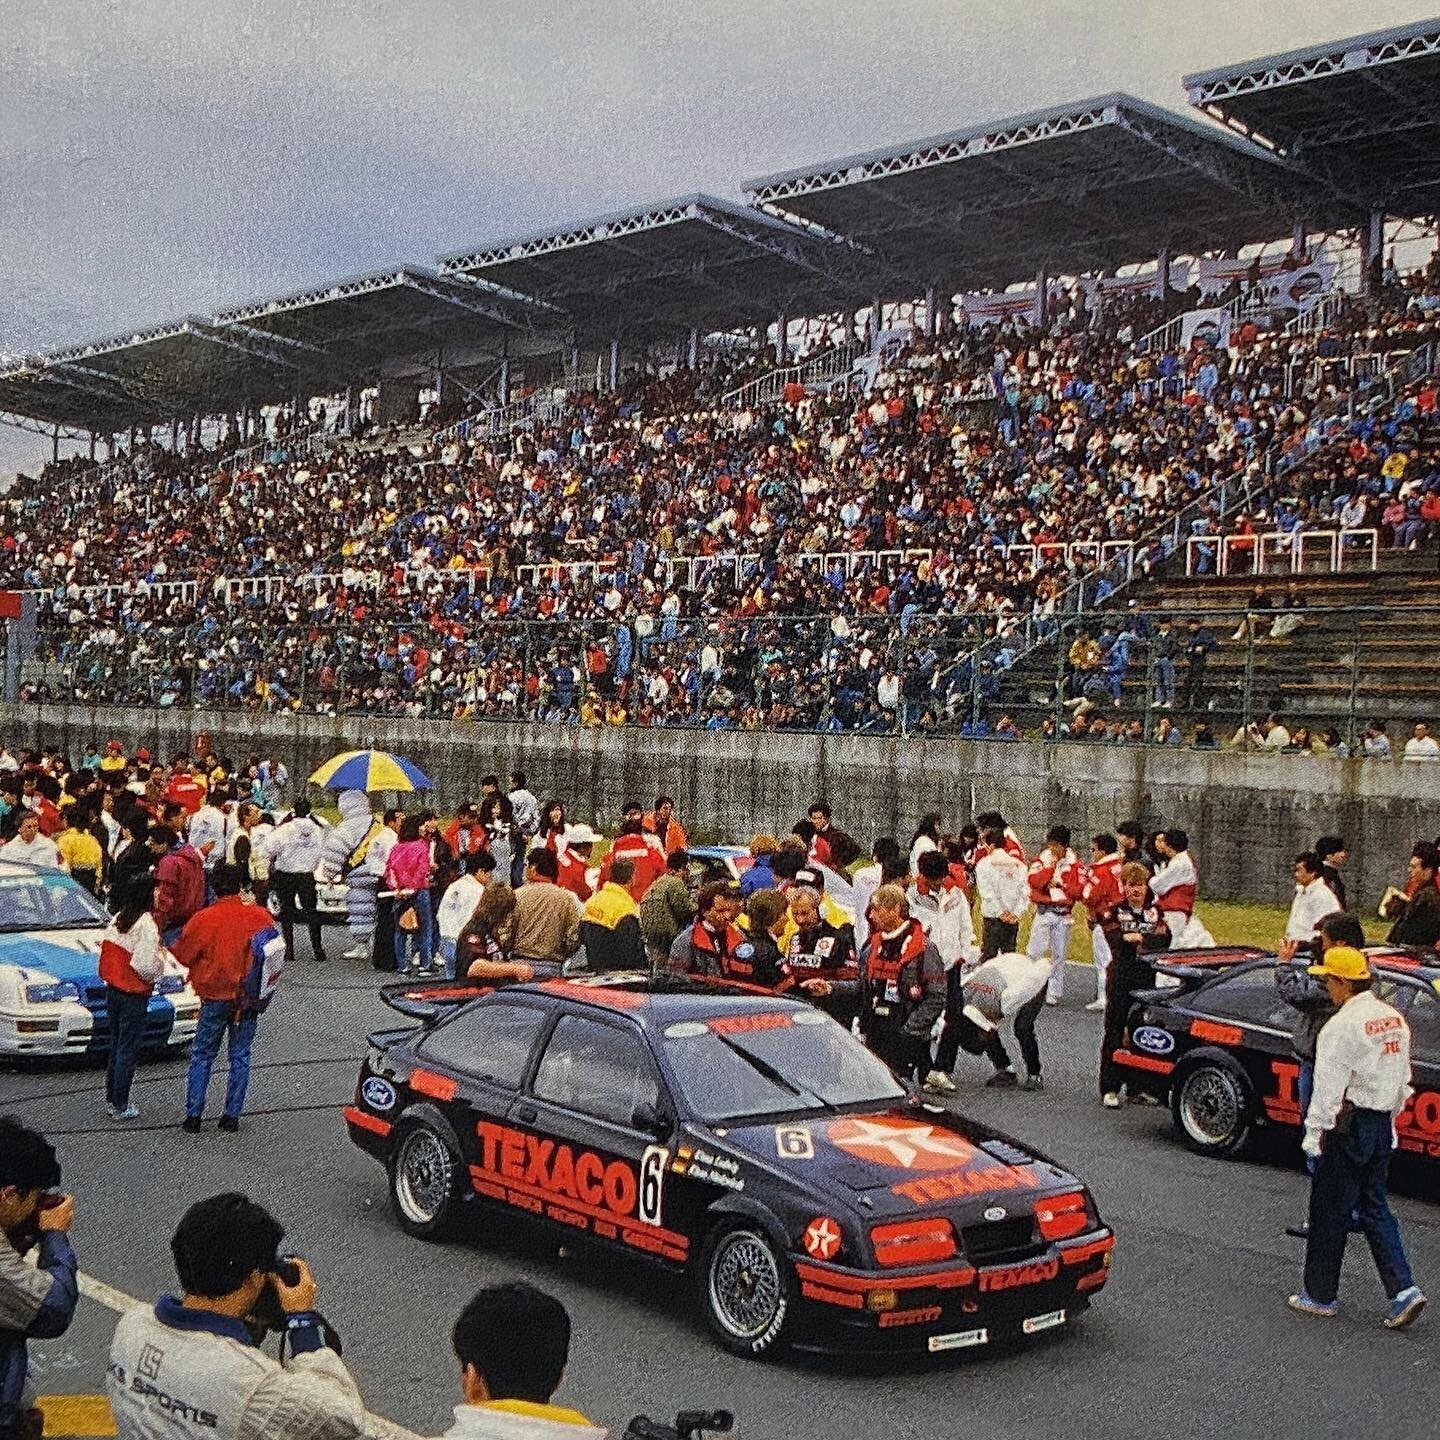 Cars are lined up for the start of the 1987 Fuji Inter-Tec 500, the last round of the World Touring Car Championship.

📷 unknown

#fujiintertec500 #intertec500 #worldtouringcarchampionship #wtcc #fordsierrars500 #sierrars500 #sierrars500cosworth #eg